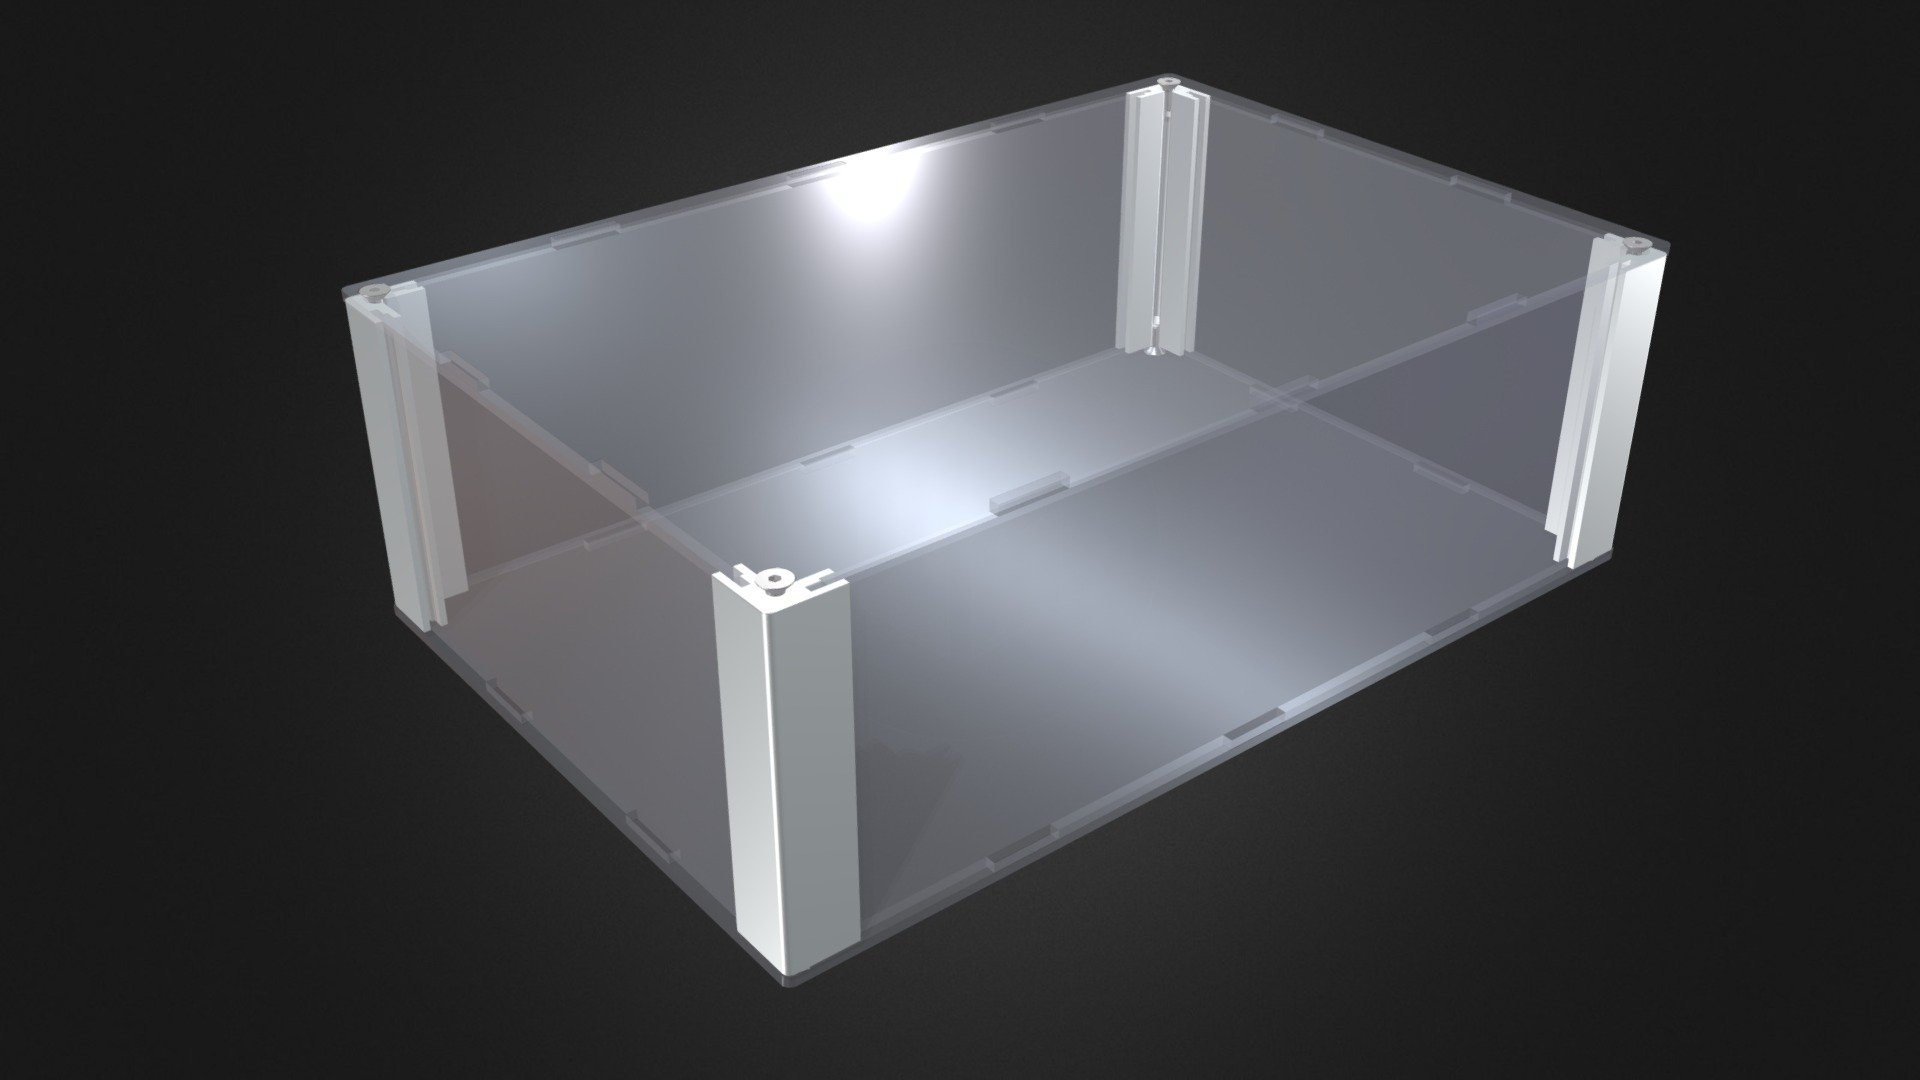 Transparent acrylic case with corner support frames.
Extruded aluminium corner frames enables the structure to be rigid when screwed.
Perfect to be used as a display case to showcase a product’s internal components at trade shows or demonstration events, or as a touch screen monitor box.

Can be manufactured in a wide range of dimensions.
Adjustable sizes available in 1mm intervals, with W and D dimensions from 50 ~ 500mm, and H dimensions from 30 ~ 500mm.

Rubber feet can be provided if required in S (Φ11.2mm) or L (Φ15.7mm)

TAKACHI Web site : https://www.takachi-enclosure.com/products/SKSF - ACRYLIC CASE - SKSF200-100-300 - 3D model by takachitec5 3d model